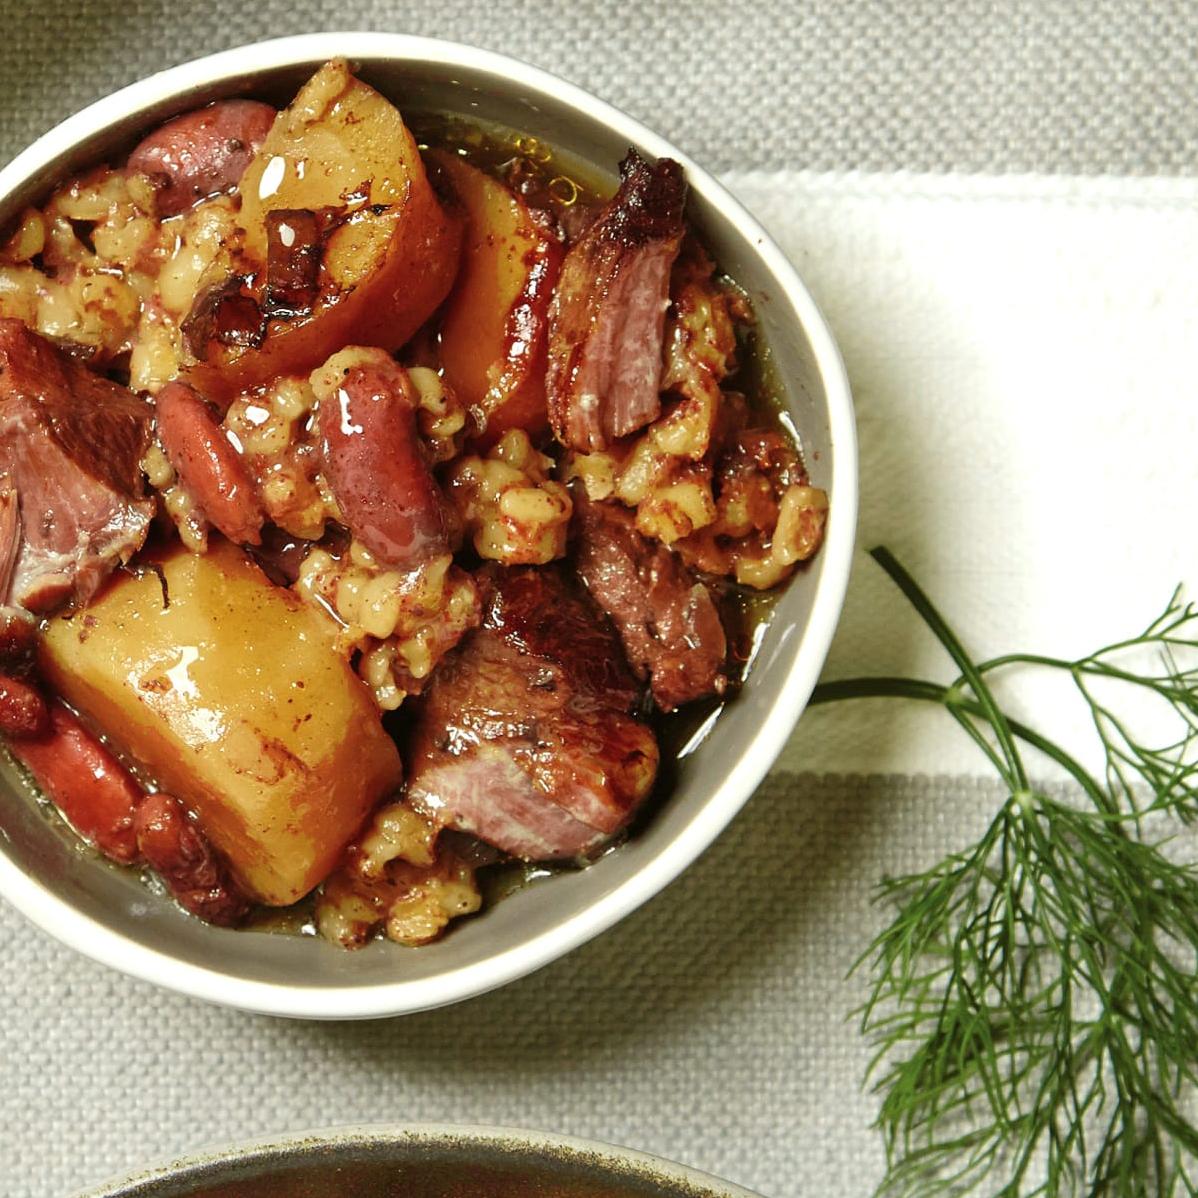  Warm up on a chilly day with a steaming hot bowl of Cholent.